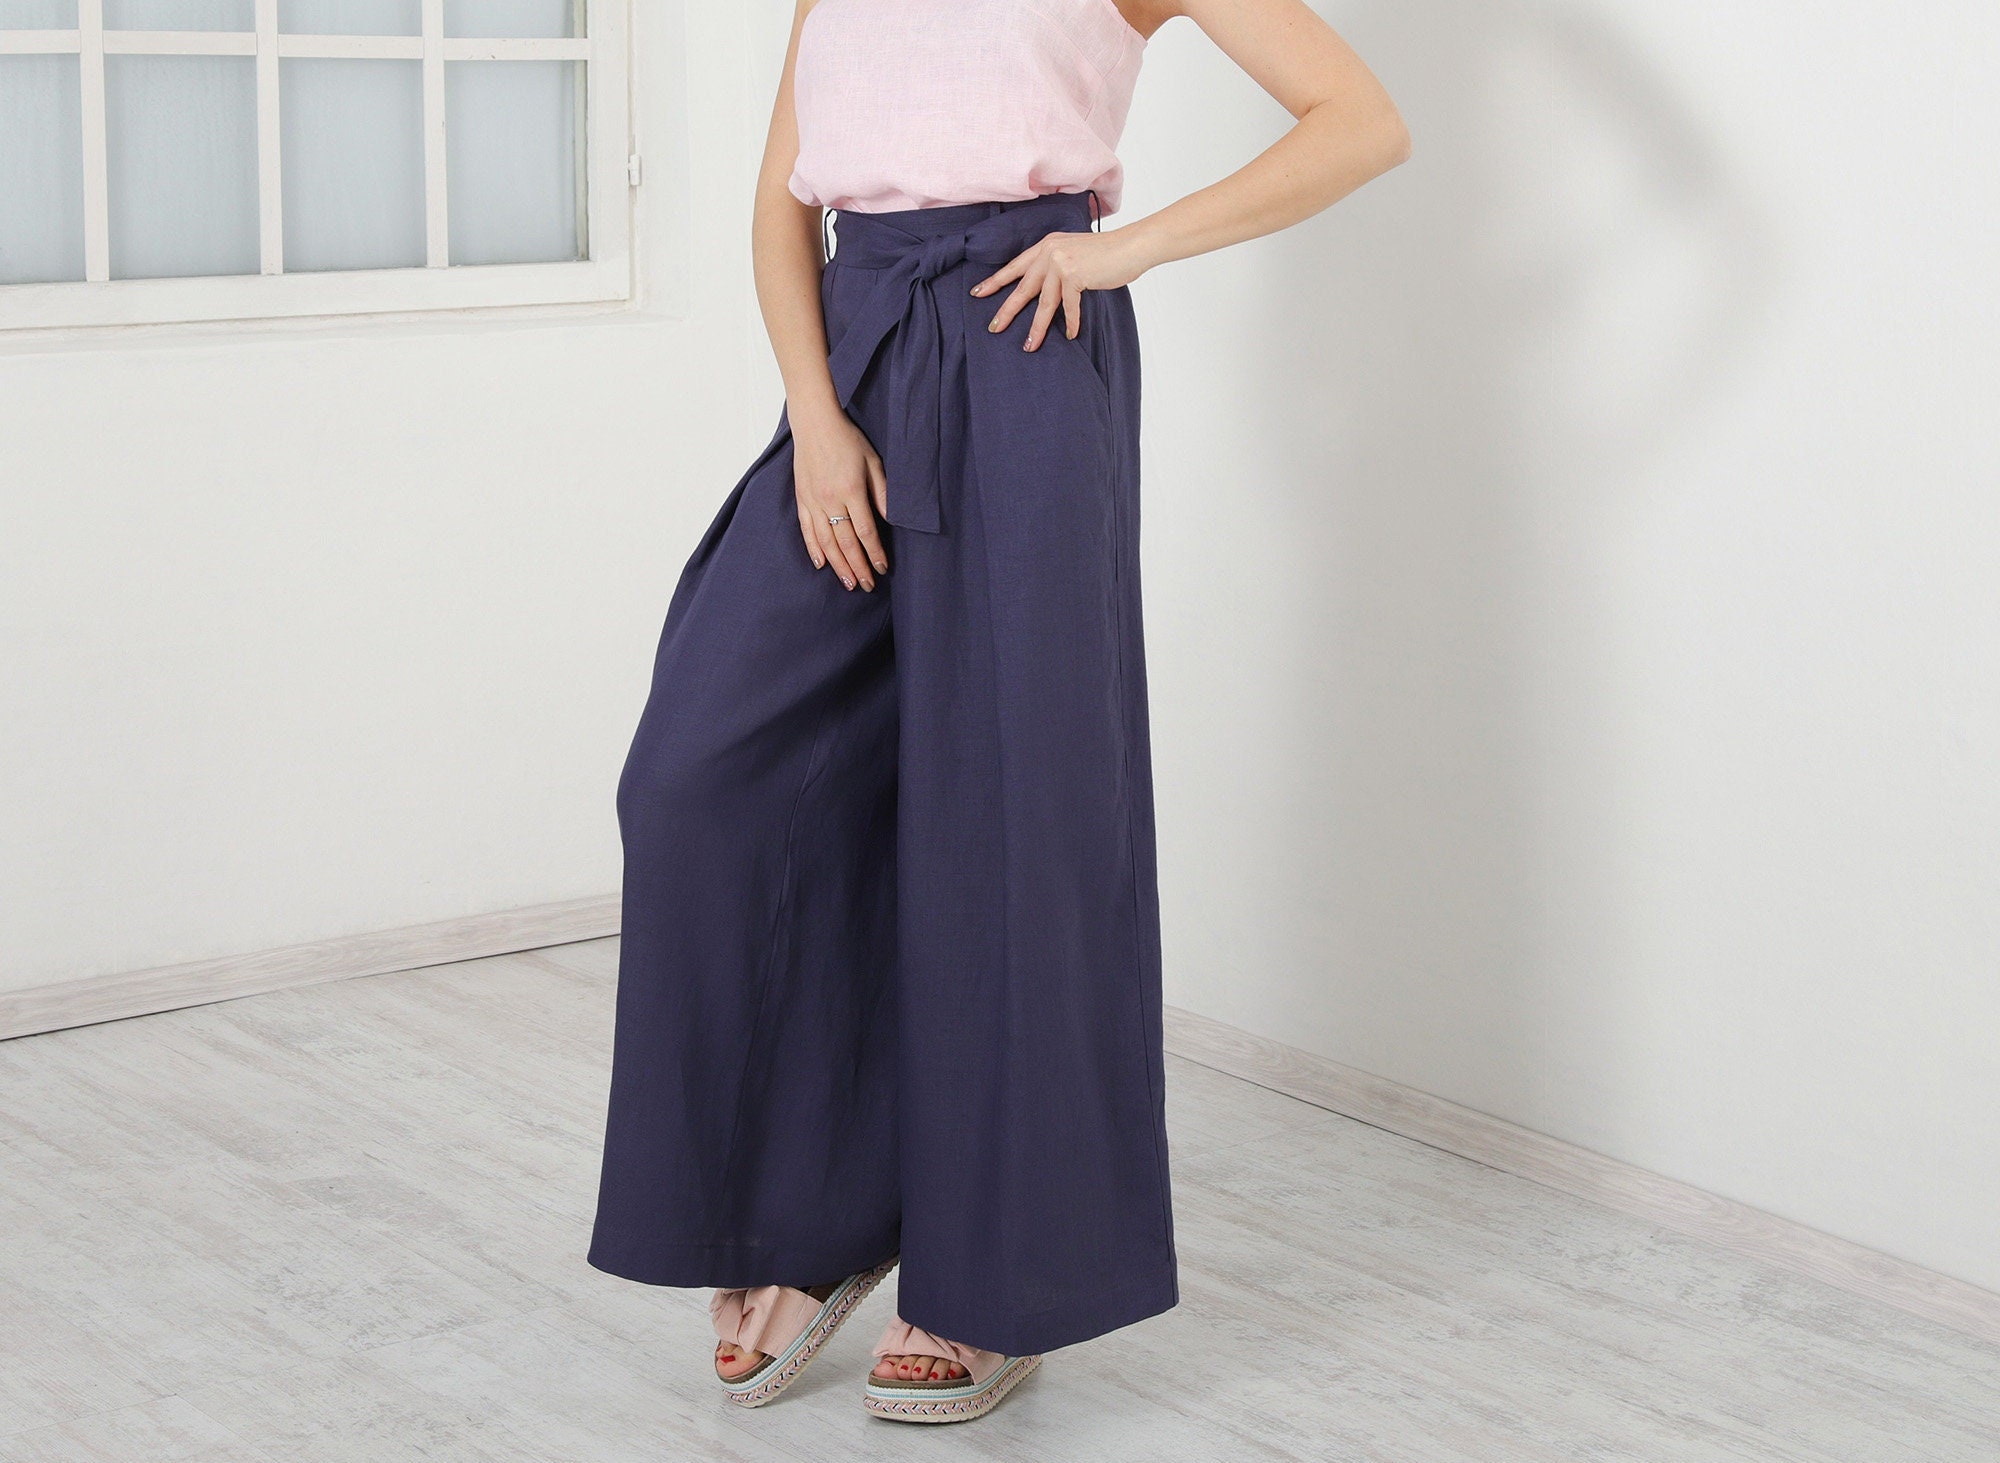 Squrely Women's Wide Leg Relaxed Solid Palazzo Pants (Free Size, Navy Blue)